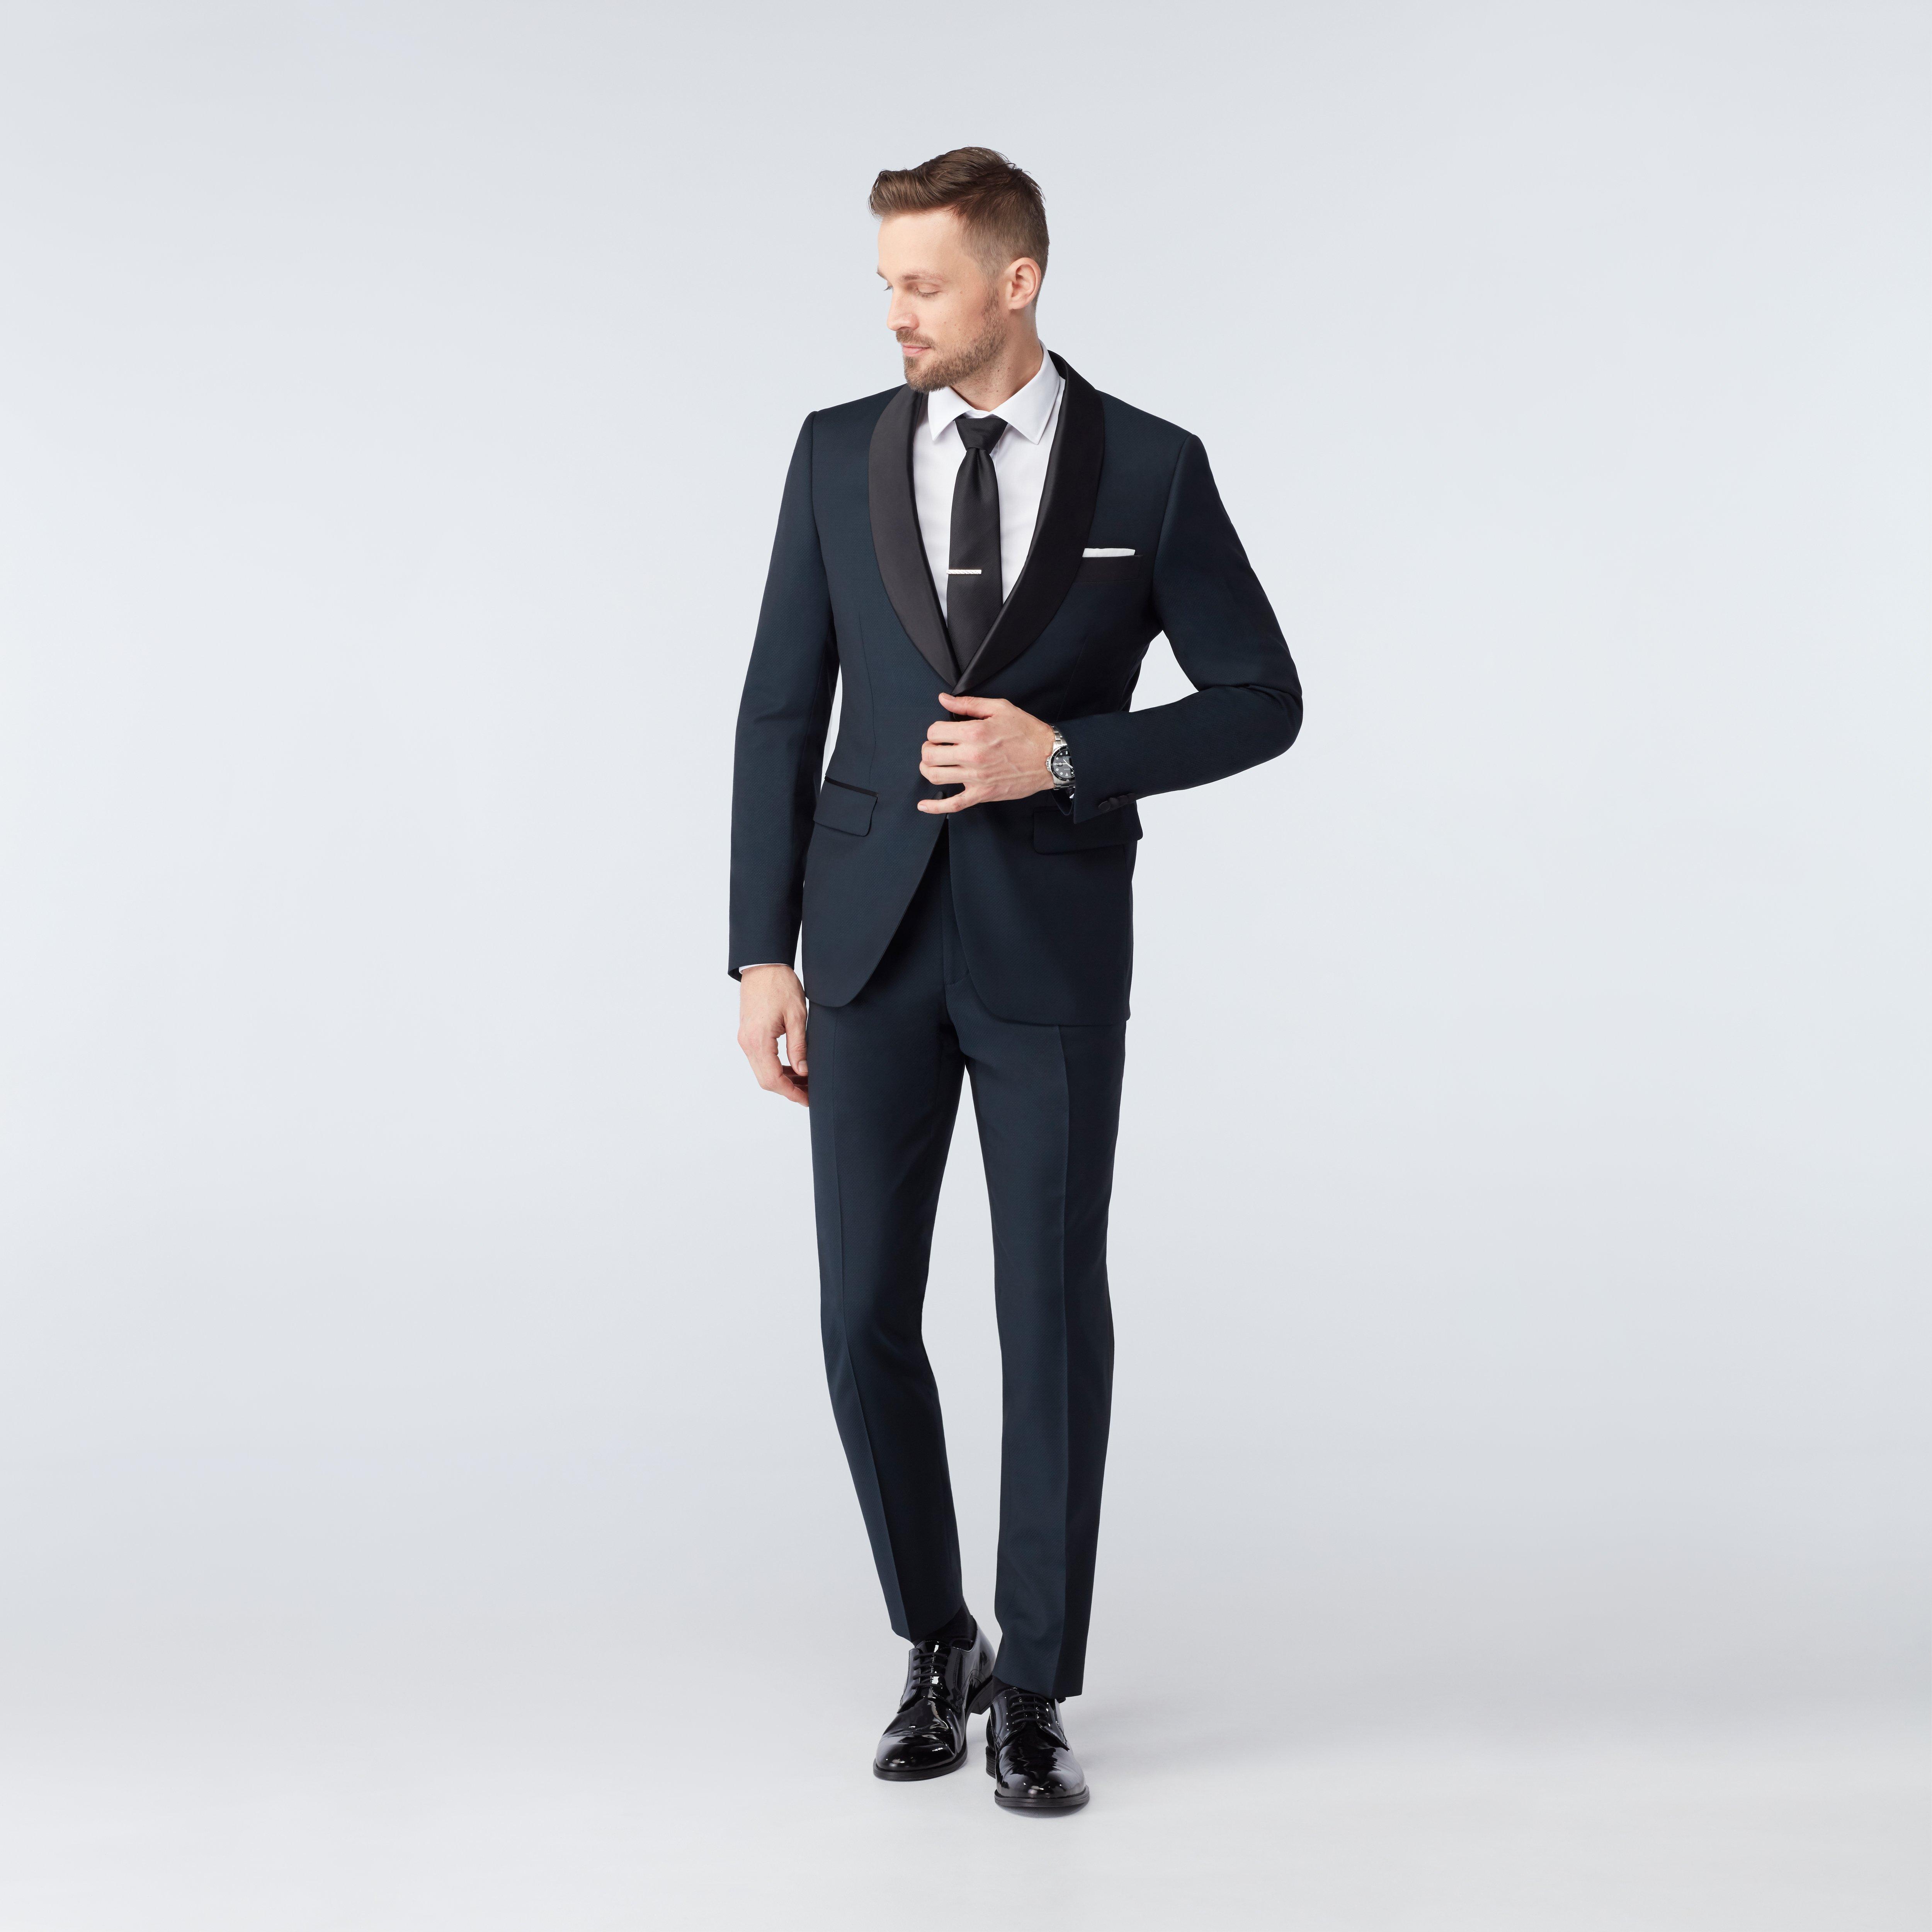 Custom Suits Made For You - Highworth Teal Tuxedo | INDOCHINO